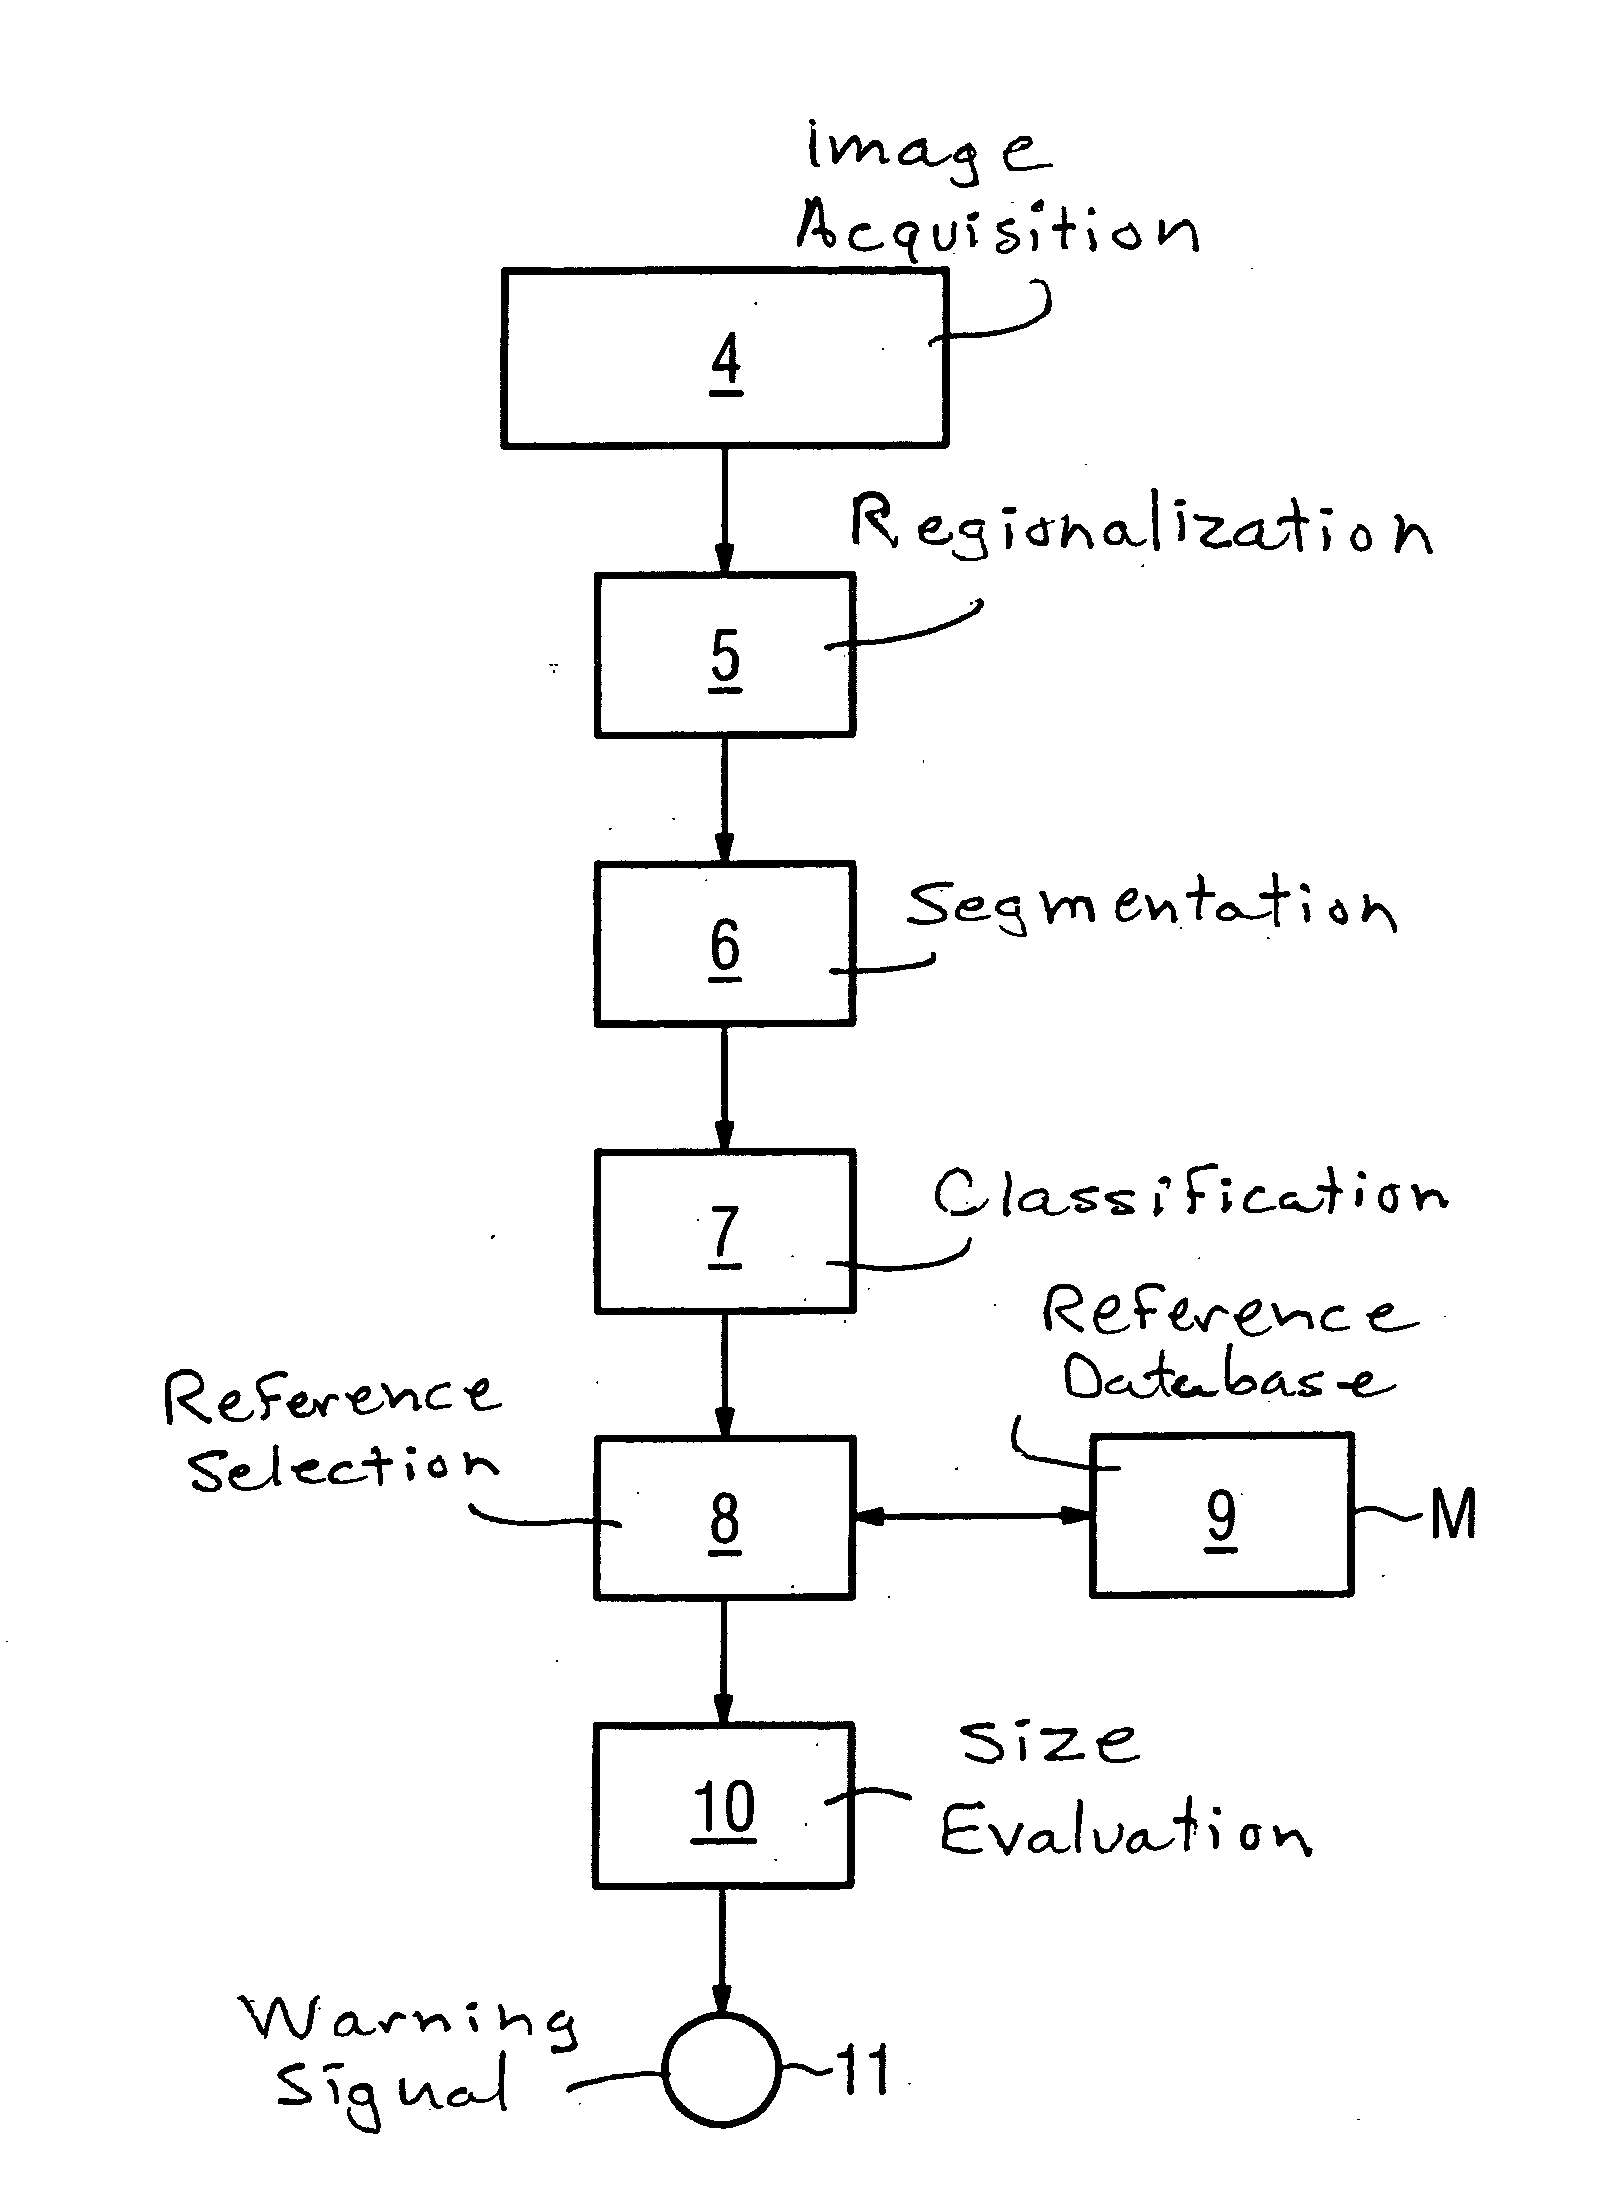 Method for the automatic scaling verification of an image, in particular a patient image